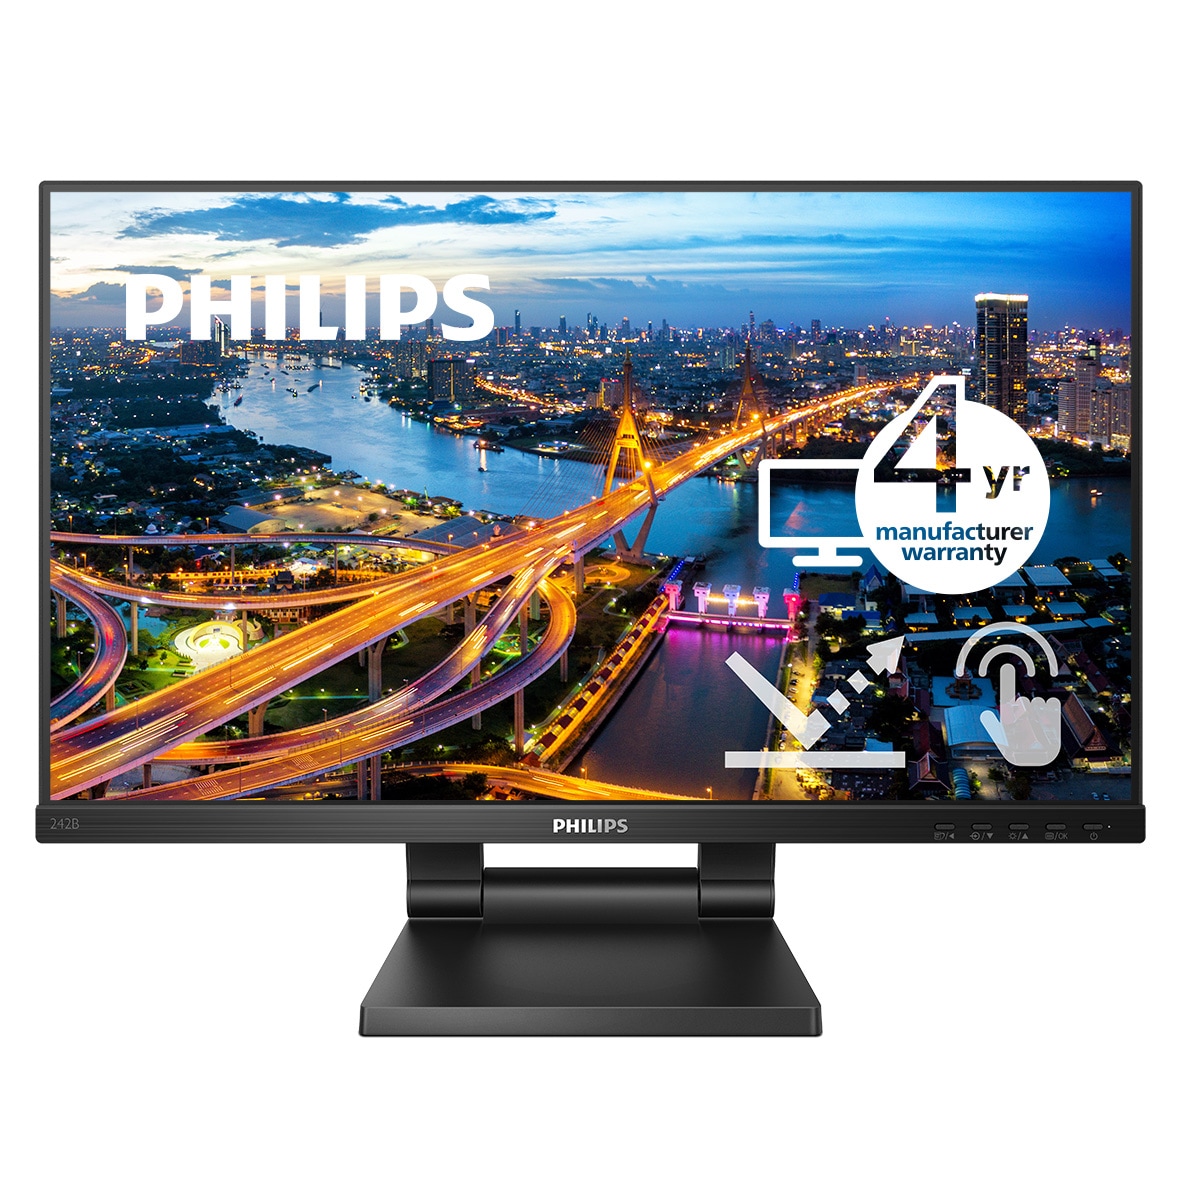 PHILIPS 242B1TC - 24" Touch Monitor, LED, FHD, VGA, DP, HDMI, 4 Year Manufacturer Warranty - 24"